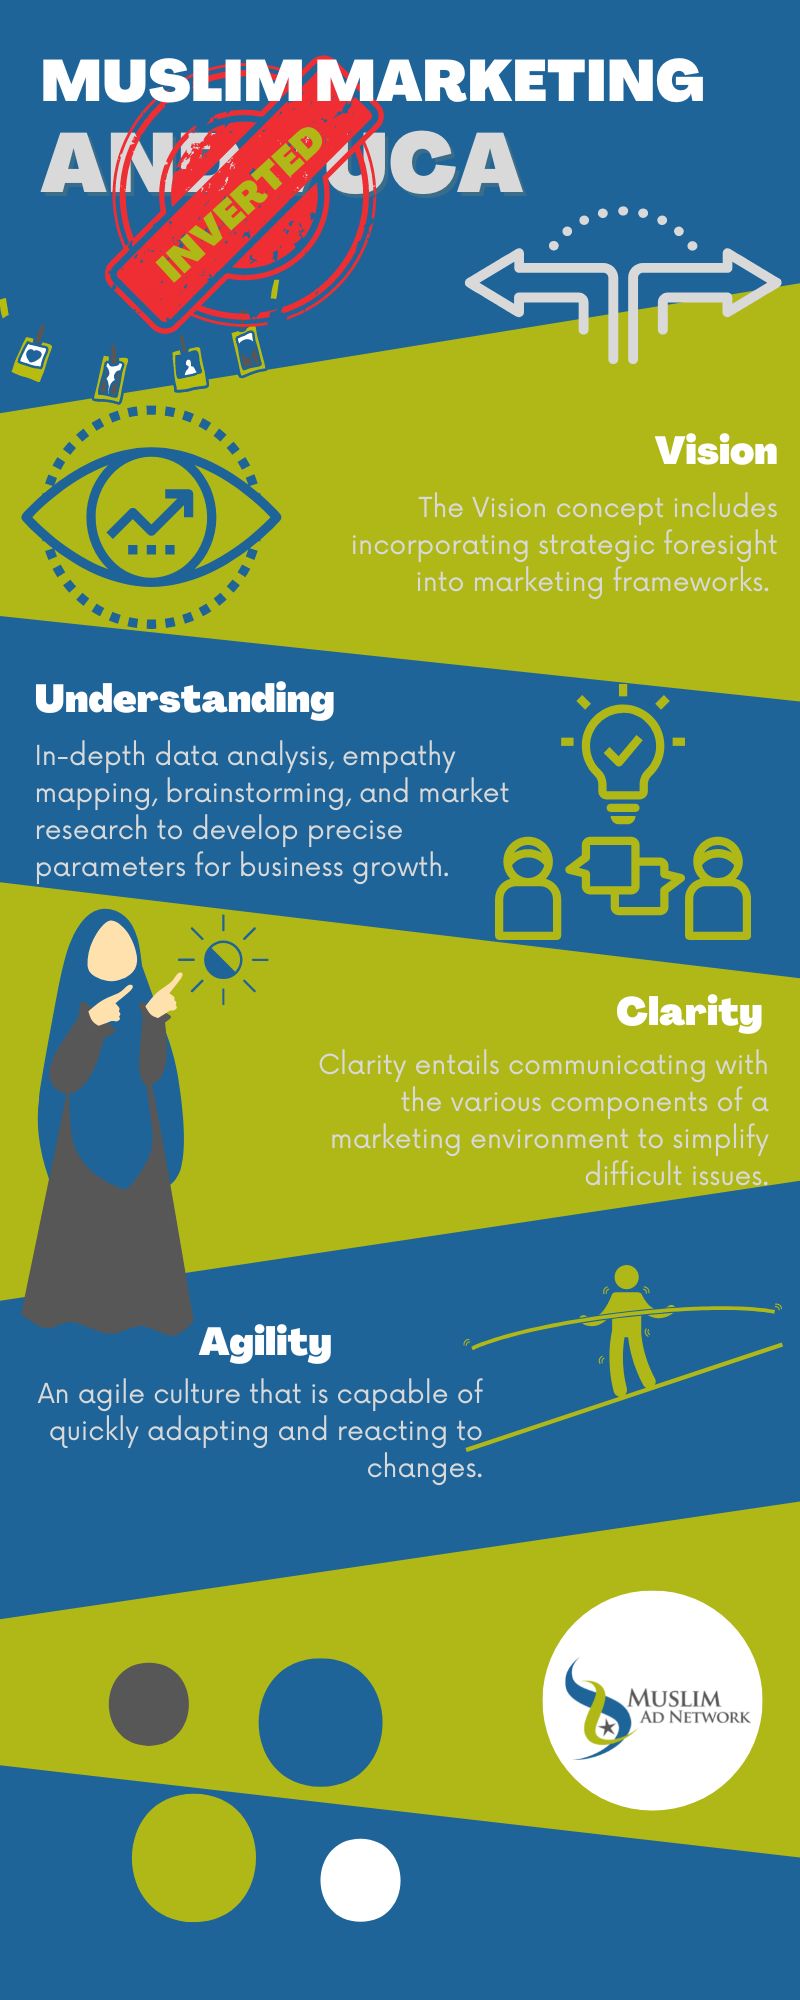 Muslim Marketing and the Inverted VUCA